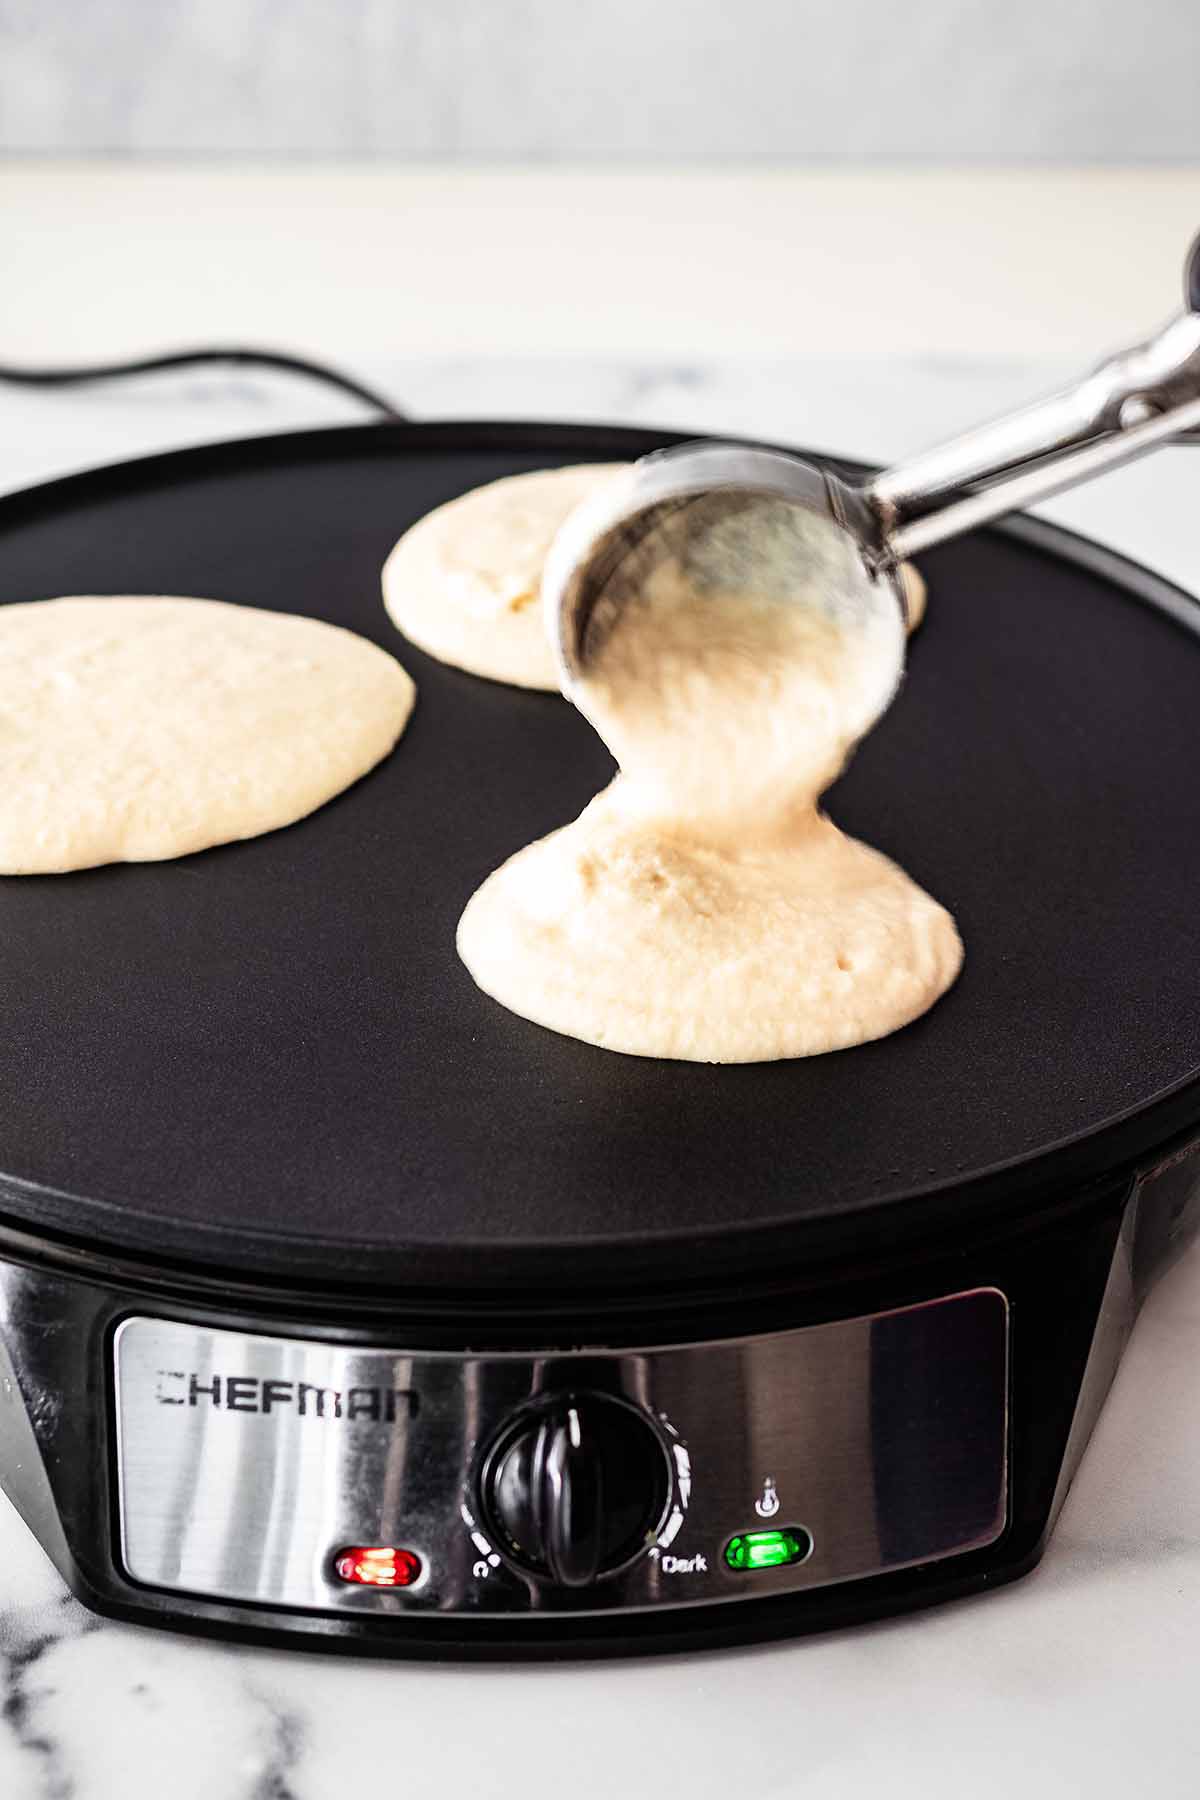 Pancake batter being ladled onto a griddle with an ice cream scoop.